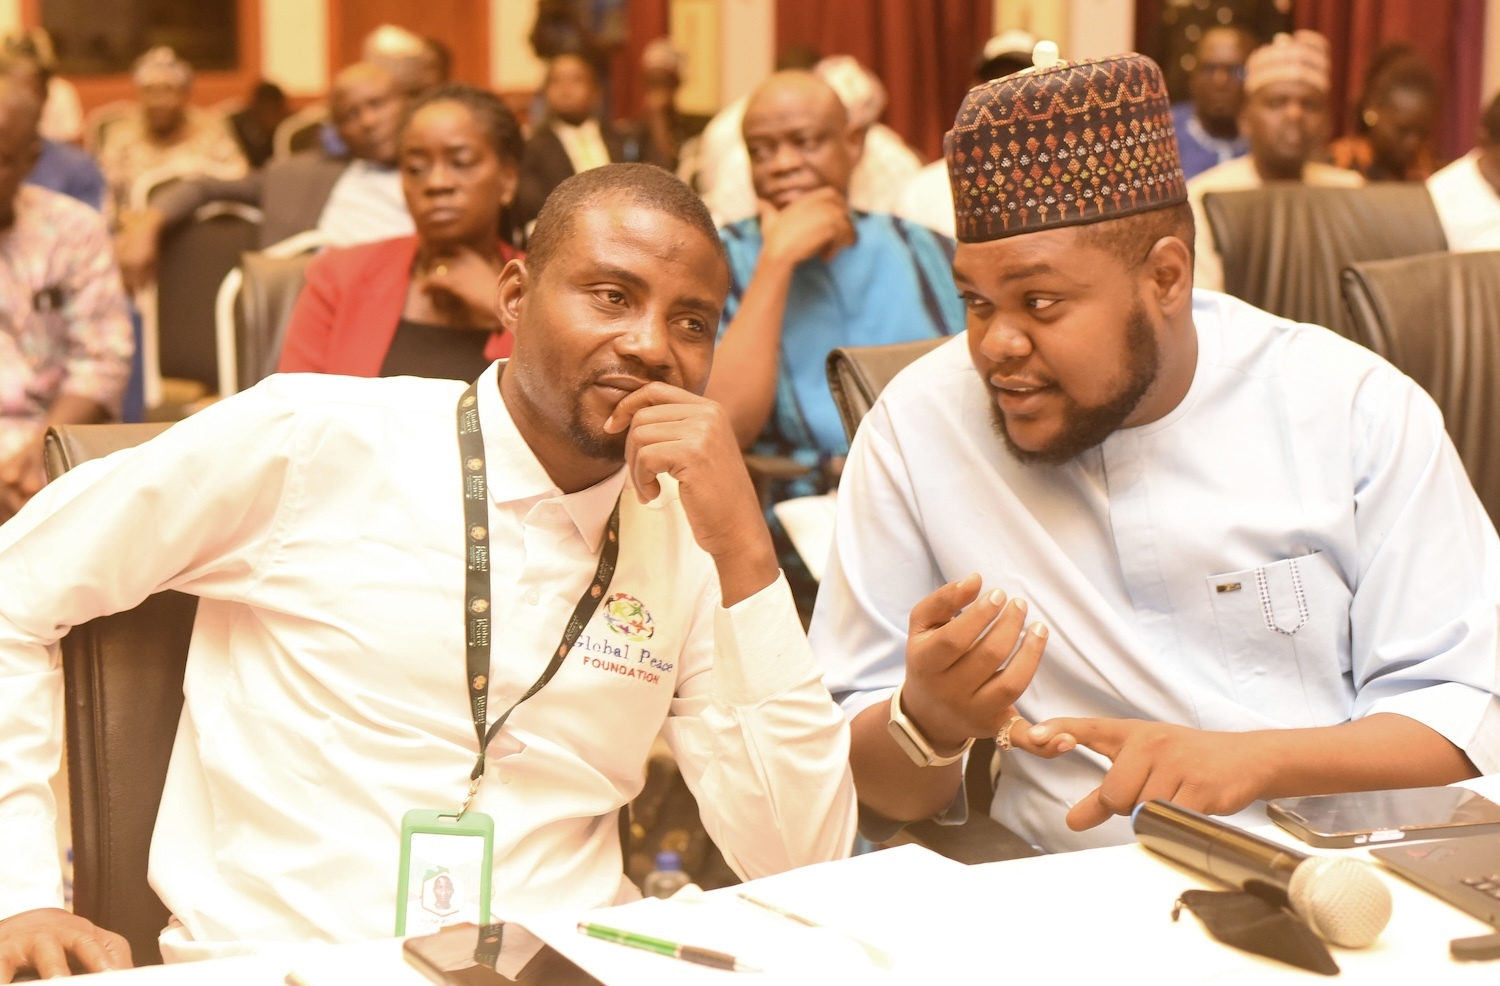 Two men sit next to each other in a conference room, engaged in discussion. One is wearing a white shirt with a lanyard, the other is in a traditional outfit and cap. Other attendees are in the background, reflecting the secure and peaceful atmosphere of Abuja as reported by Nigerian News.